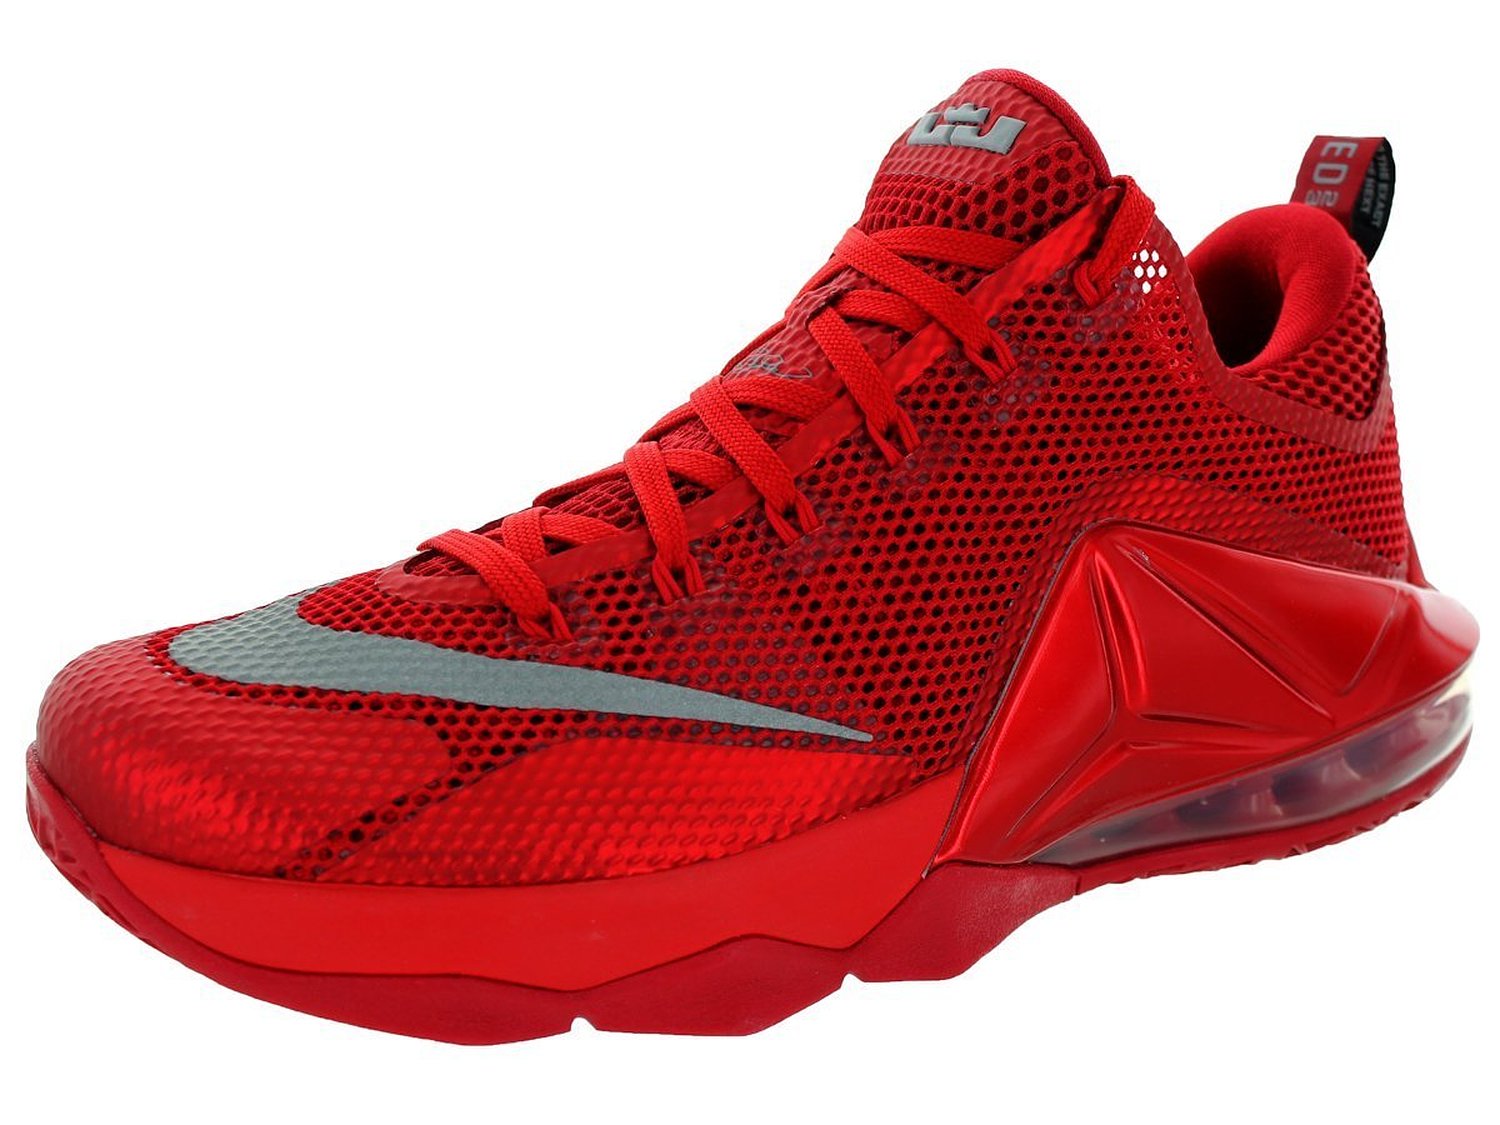 Nike Men's Lebron XII Low Unvrsty Rd/Rflct Slvr/Gym Rd/B Basketball Shoes - image 1 of 3